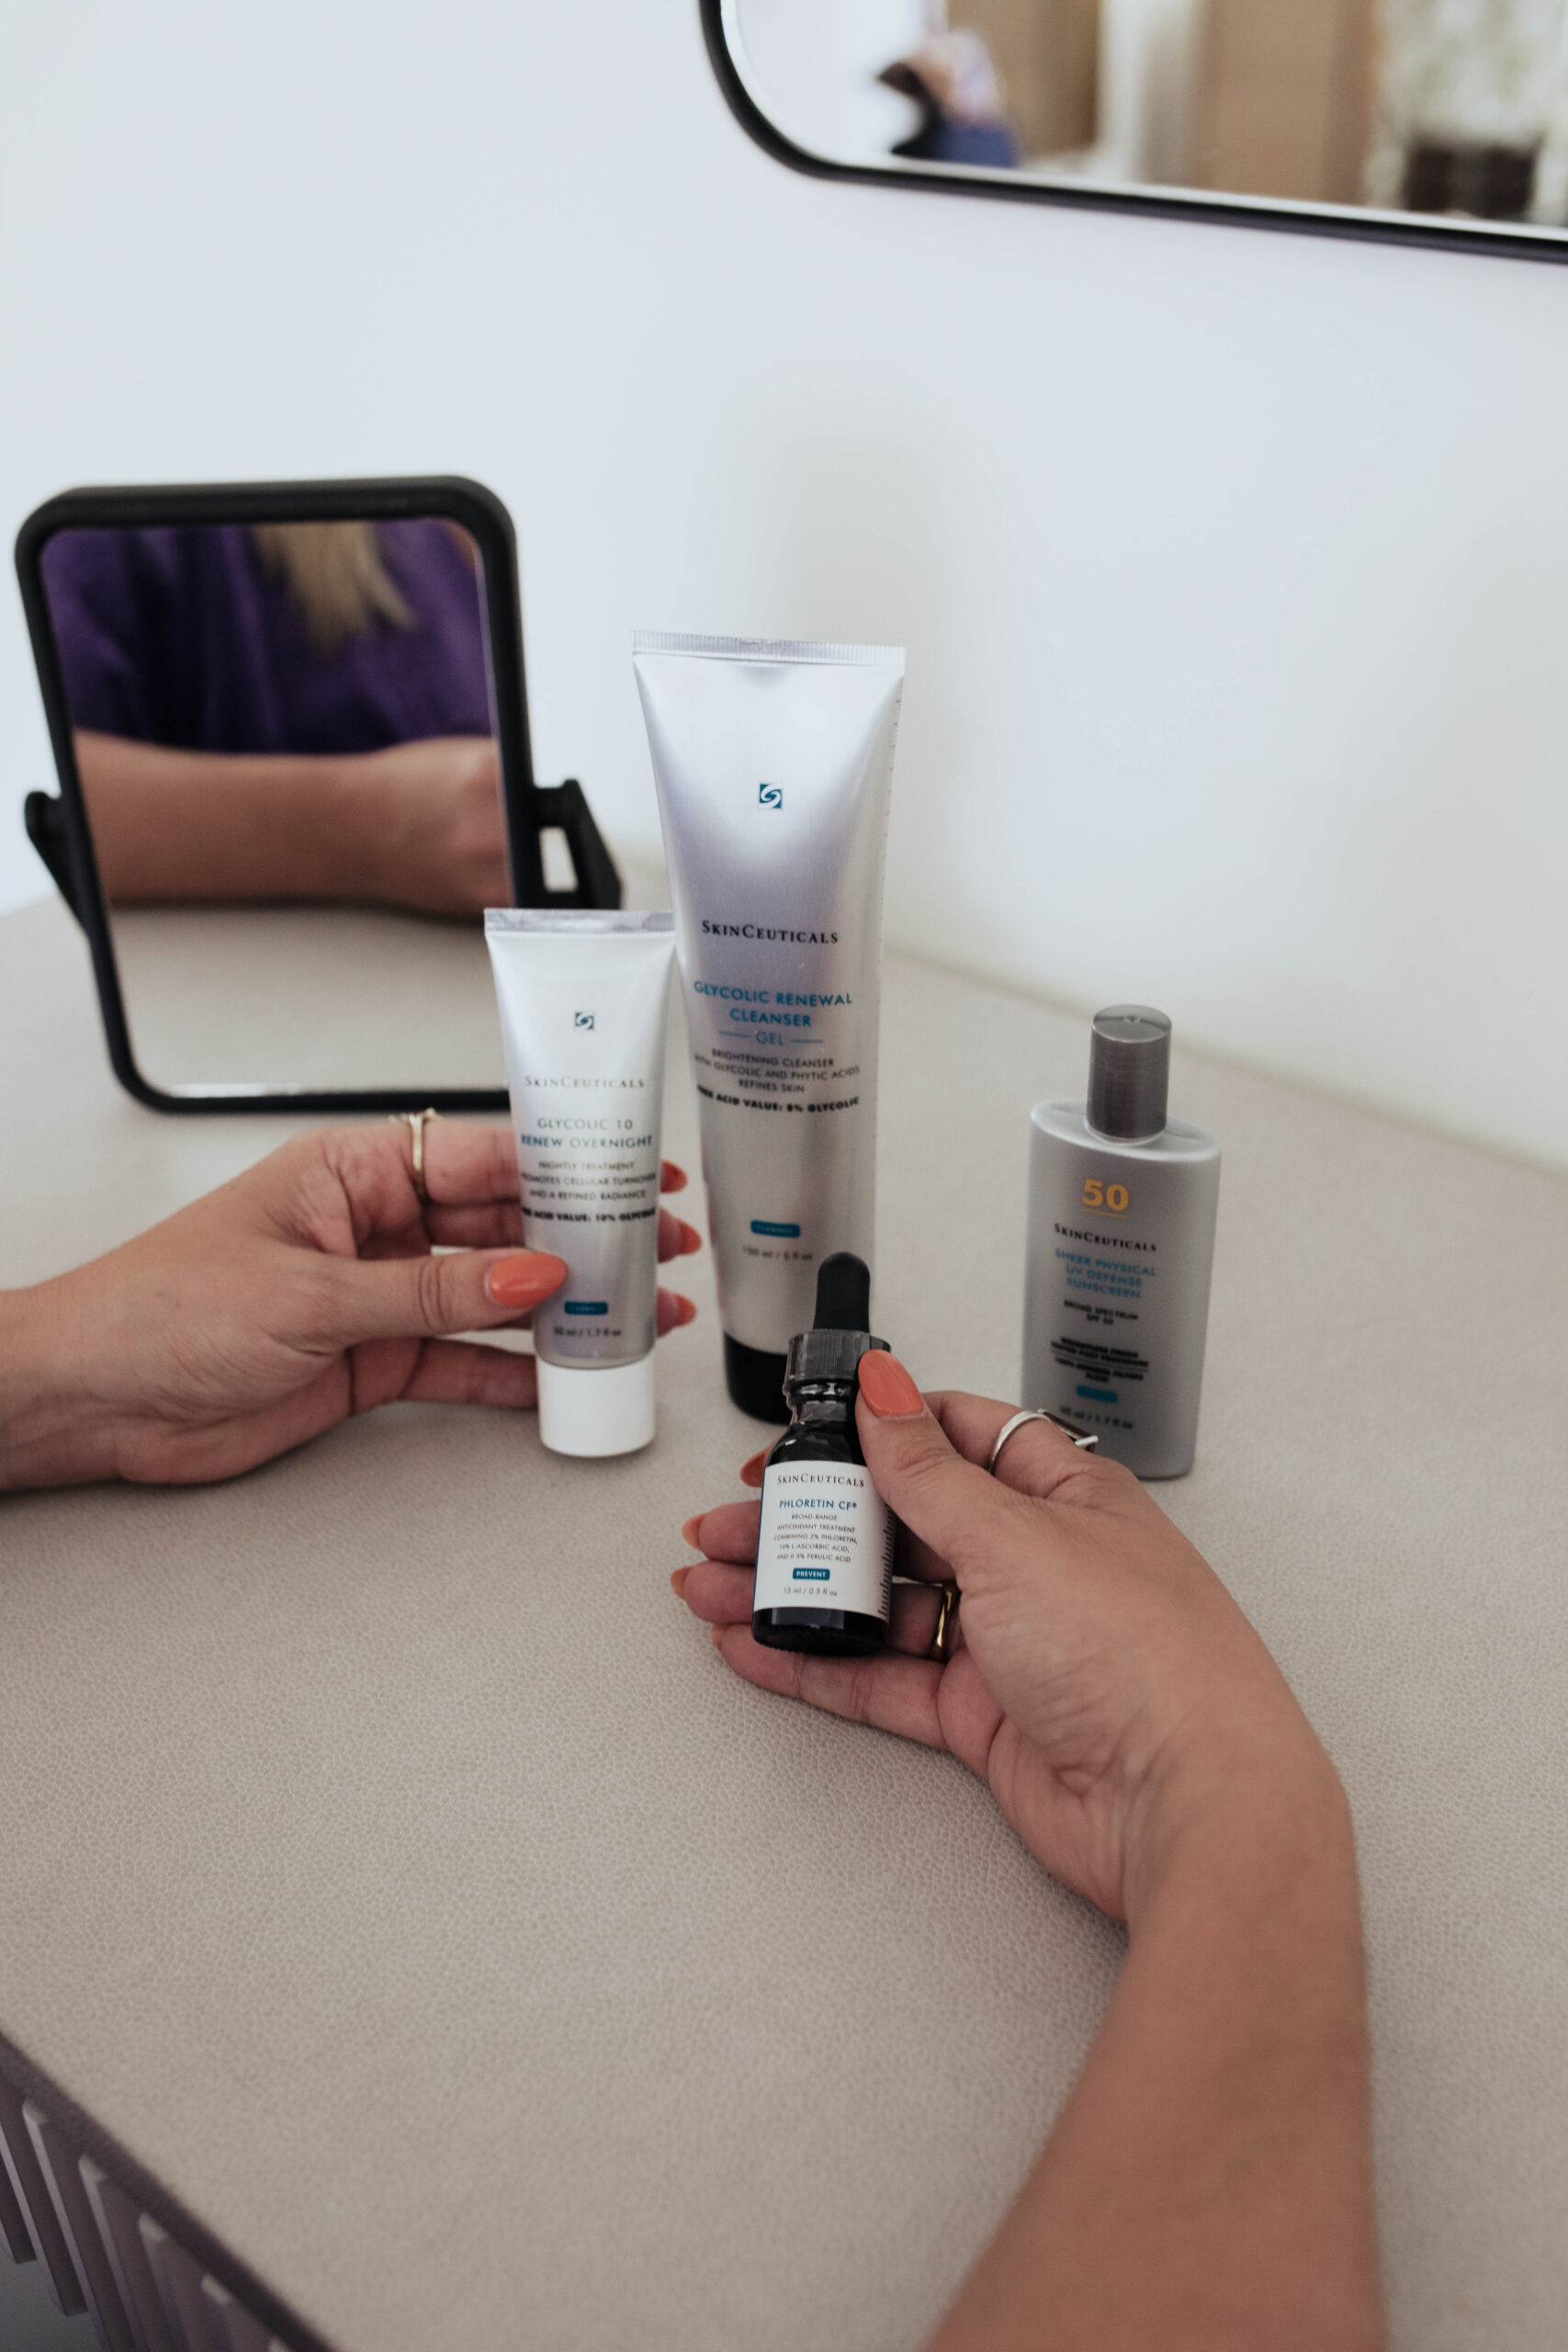 Where to Buy Skinceuticals, Dermstore